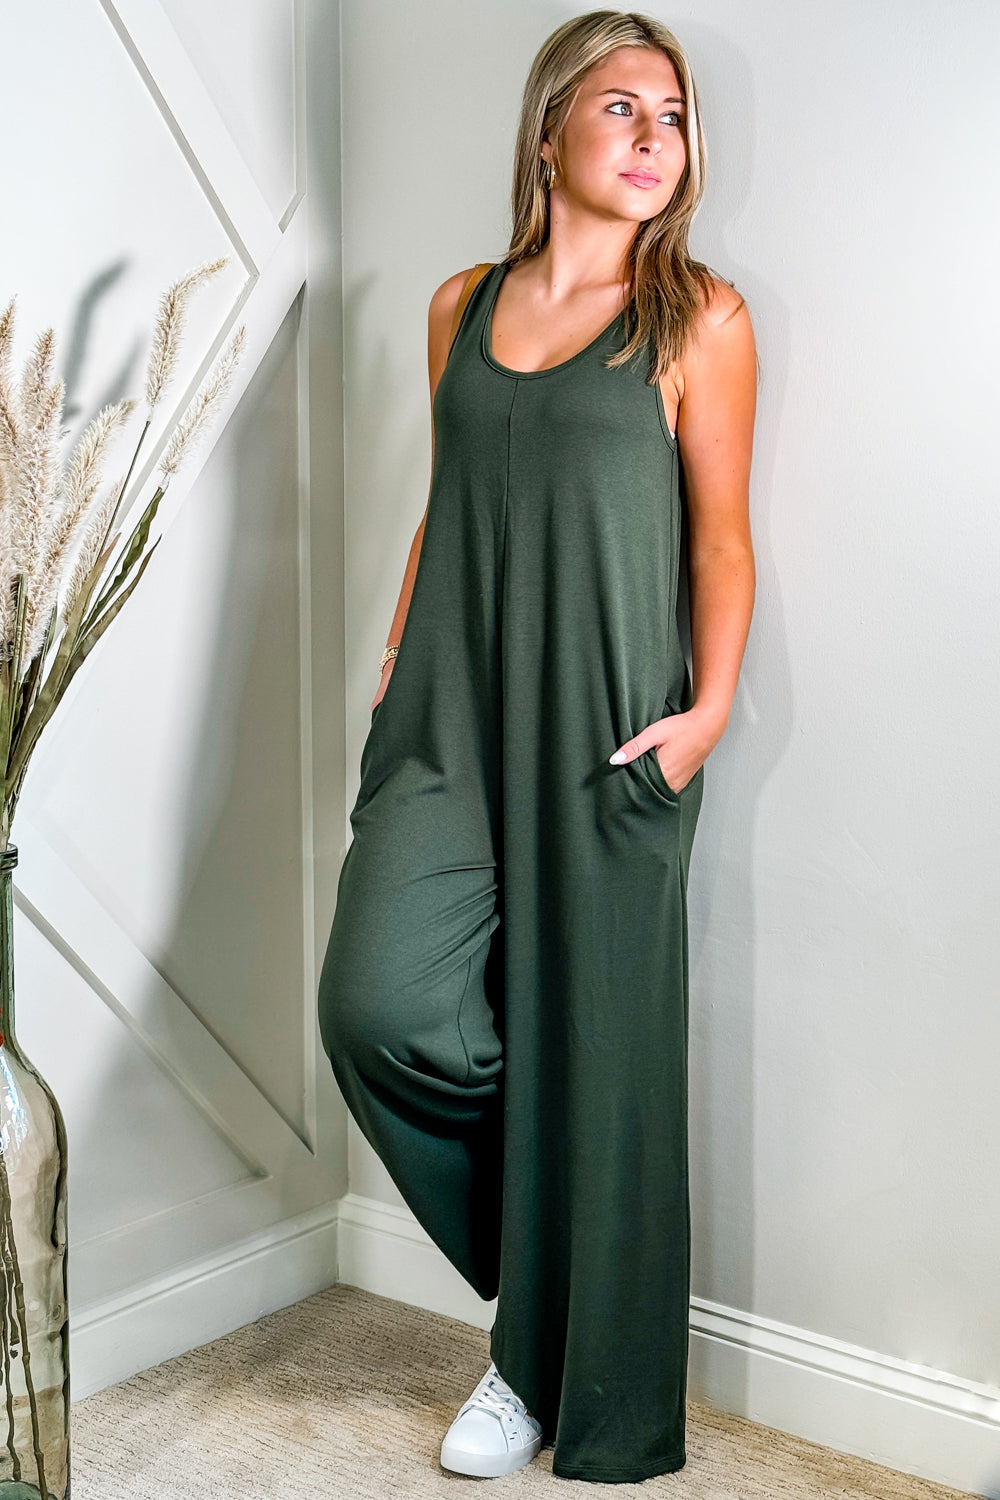 Cute Days Ahead French Terry Jumpsuit - Olive | Makk Fashions